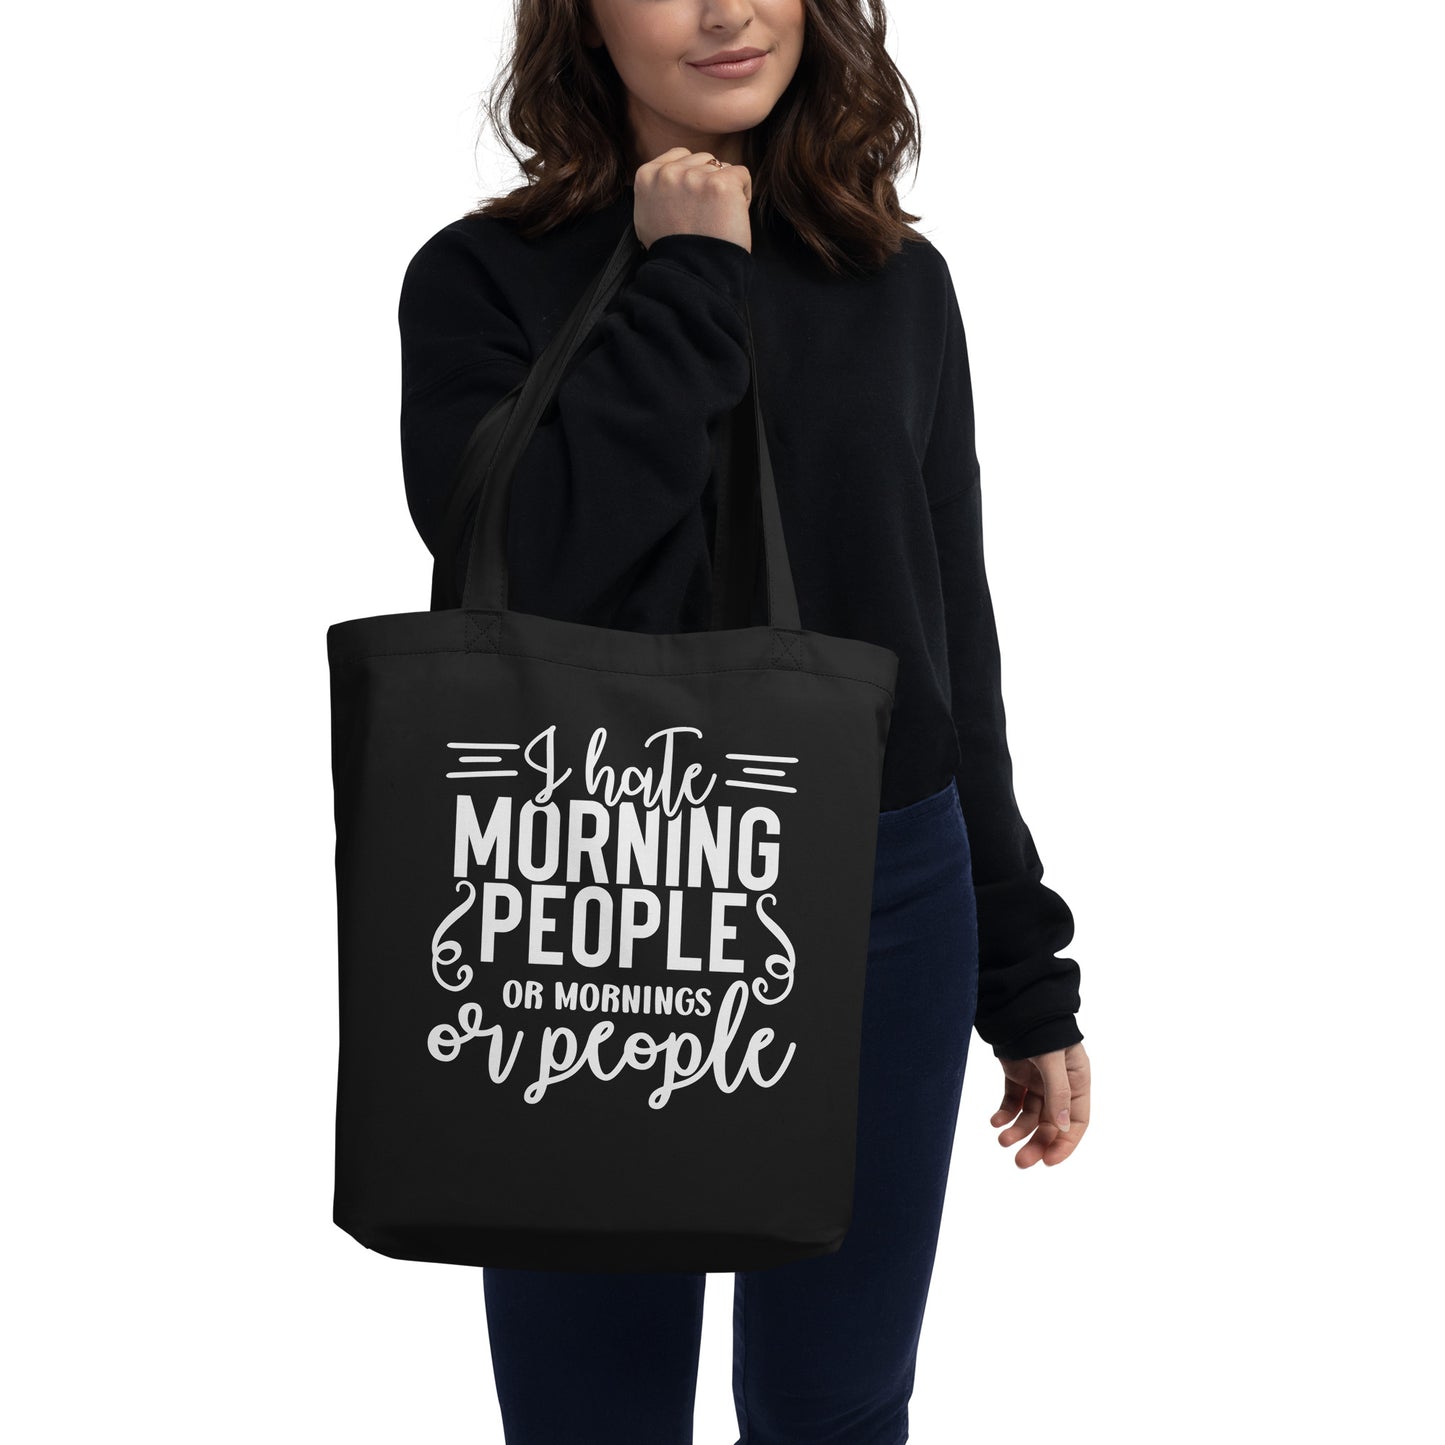 I Hate Morning People Eco Tote Bag